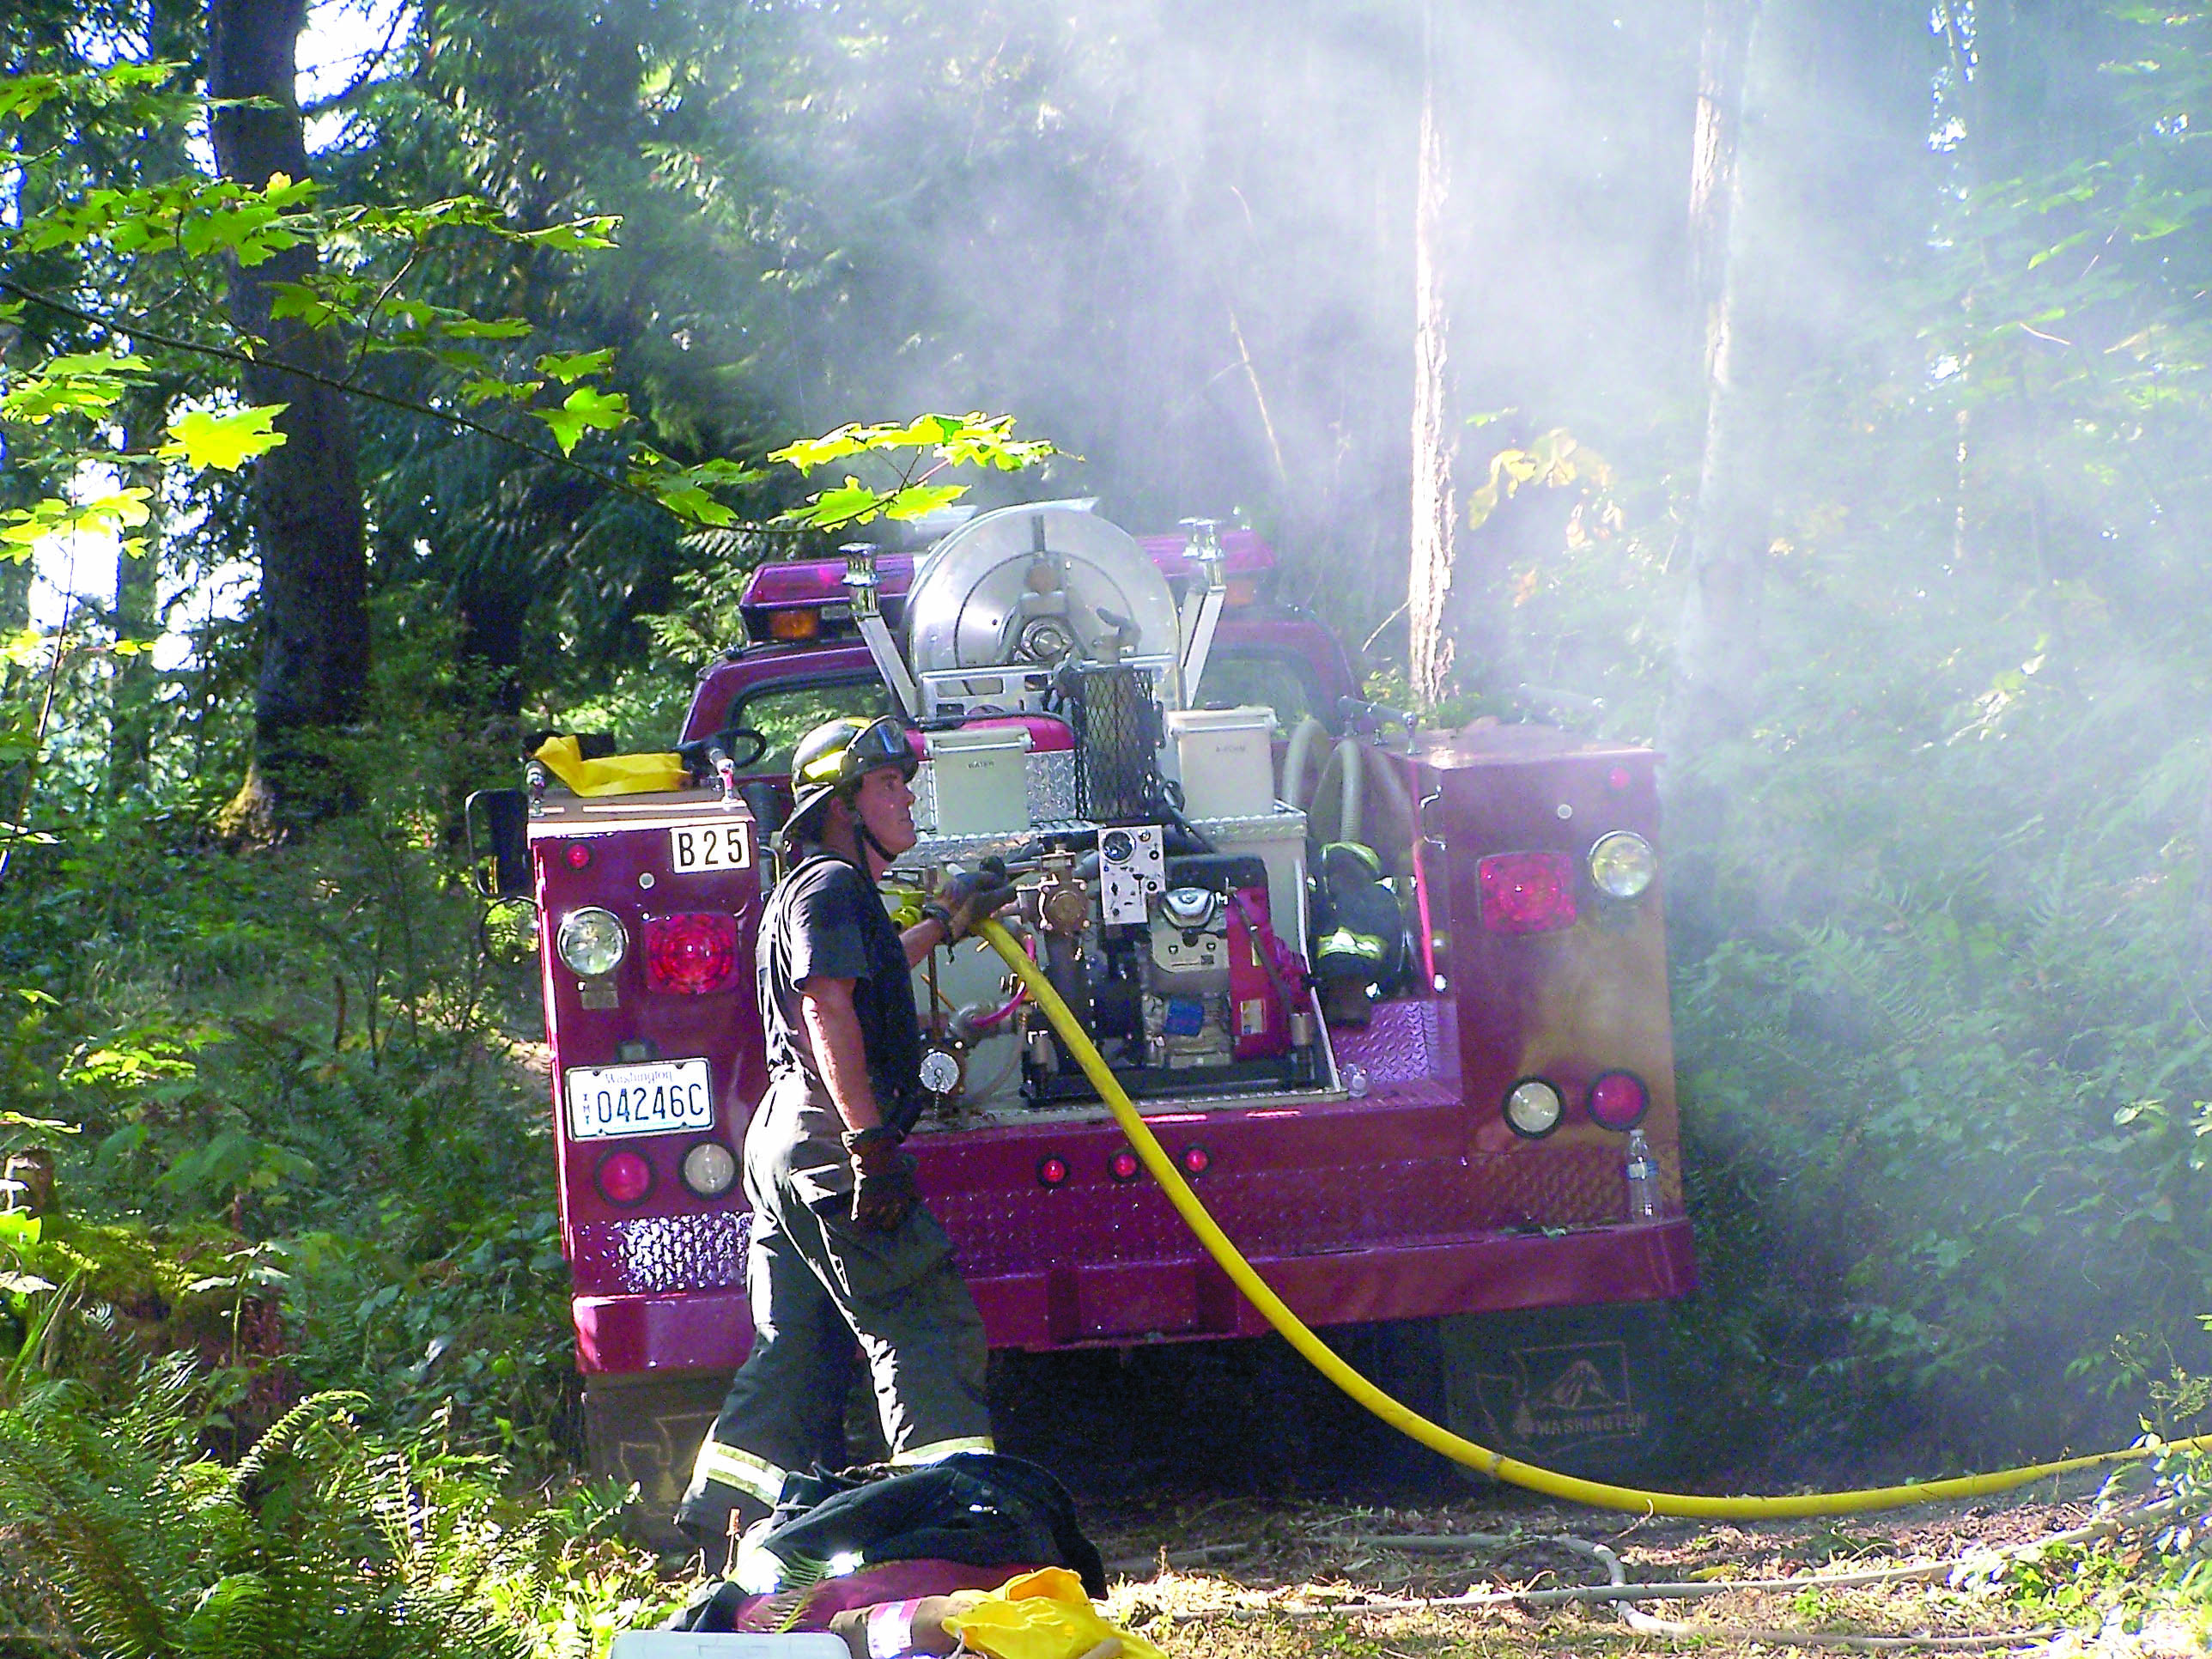 Clallam County Fire District No. 2 Firefighter Howard Parker pumps water onto a brush fire off Black Diamond Road south of Port Angeles. Clallam County Fire District No. 2